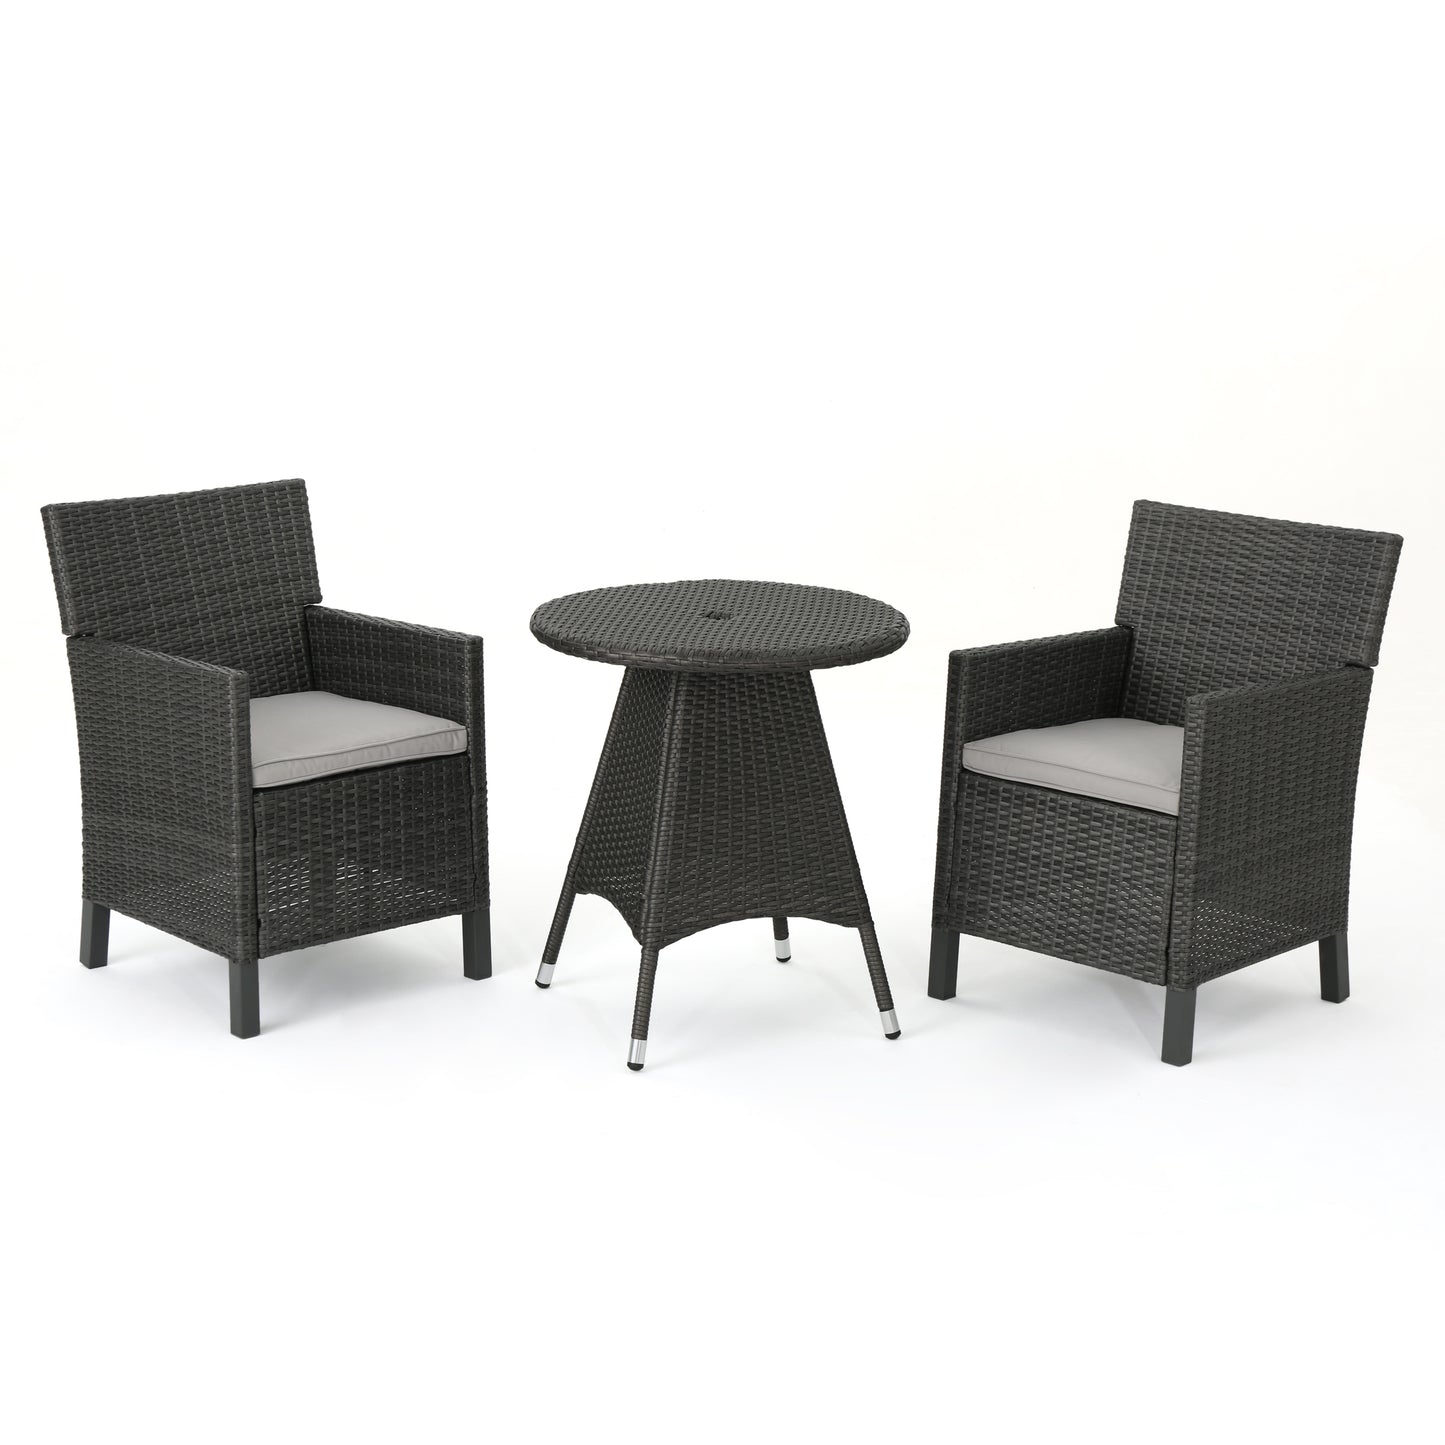 Cyril Outdoor 3 Piece Wicker Dining Set with Water Resistant Cushions